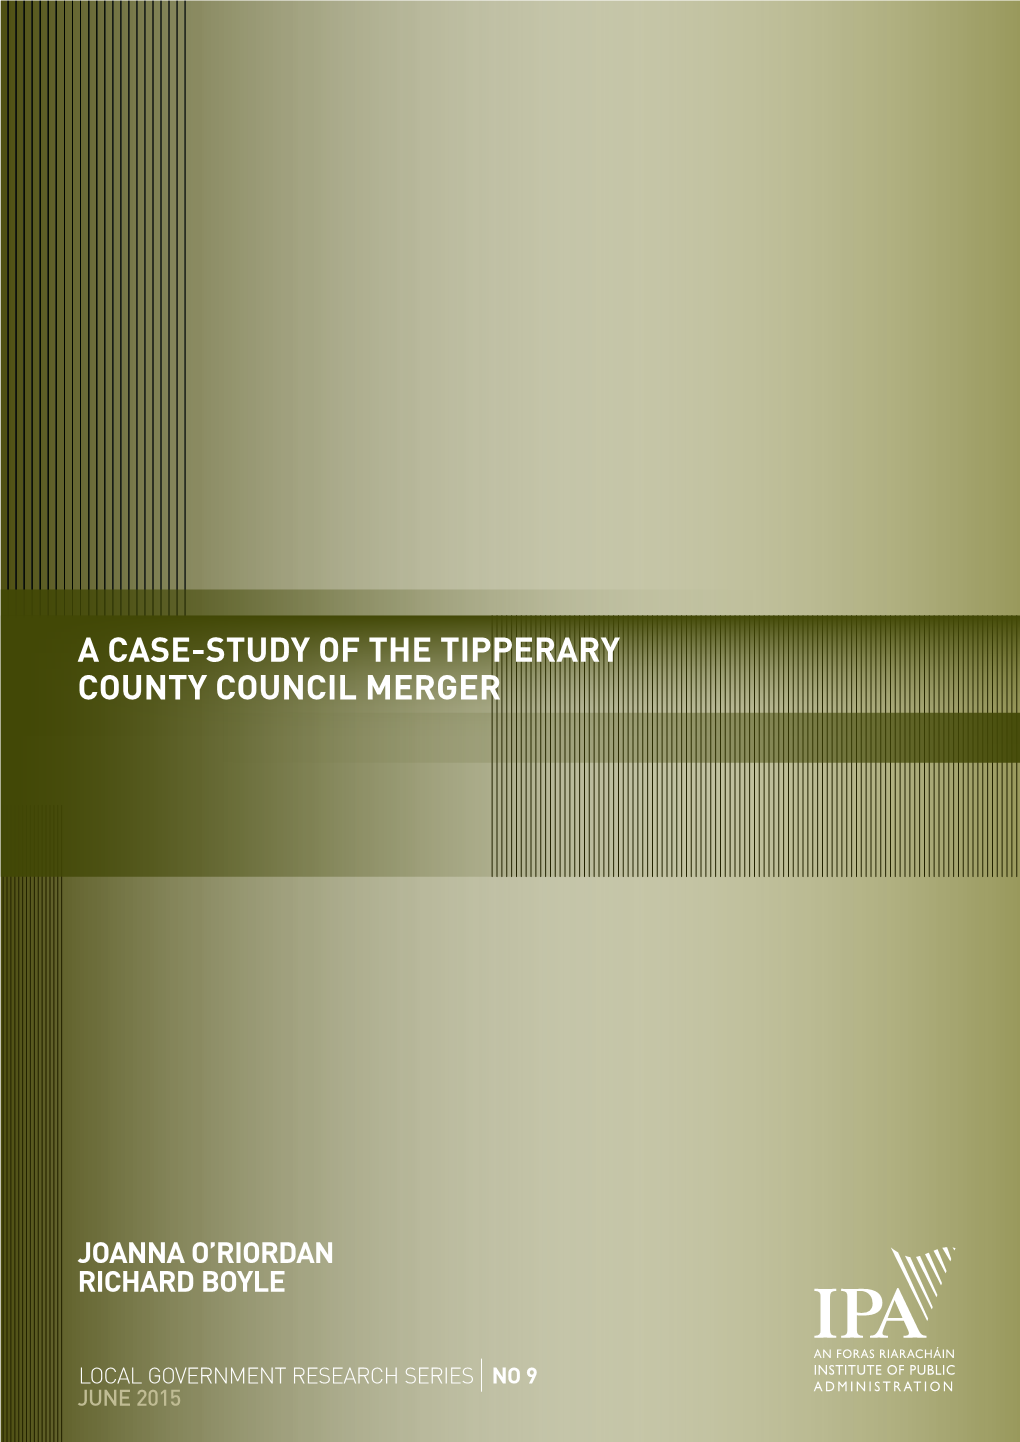 A Case-Study of the Tipperary County Council Merger